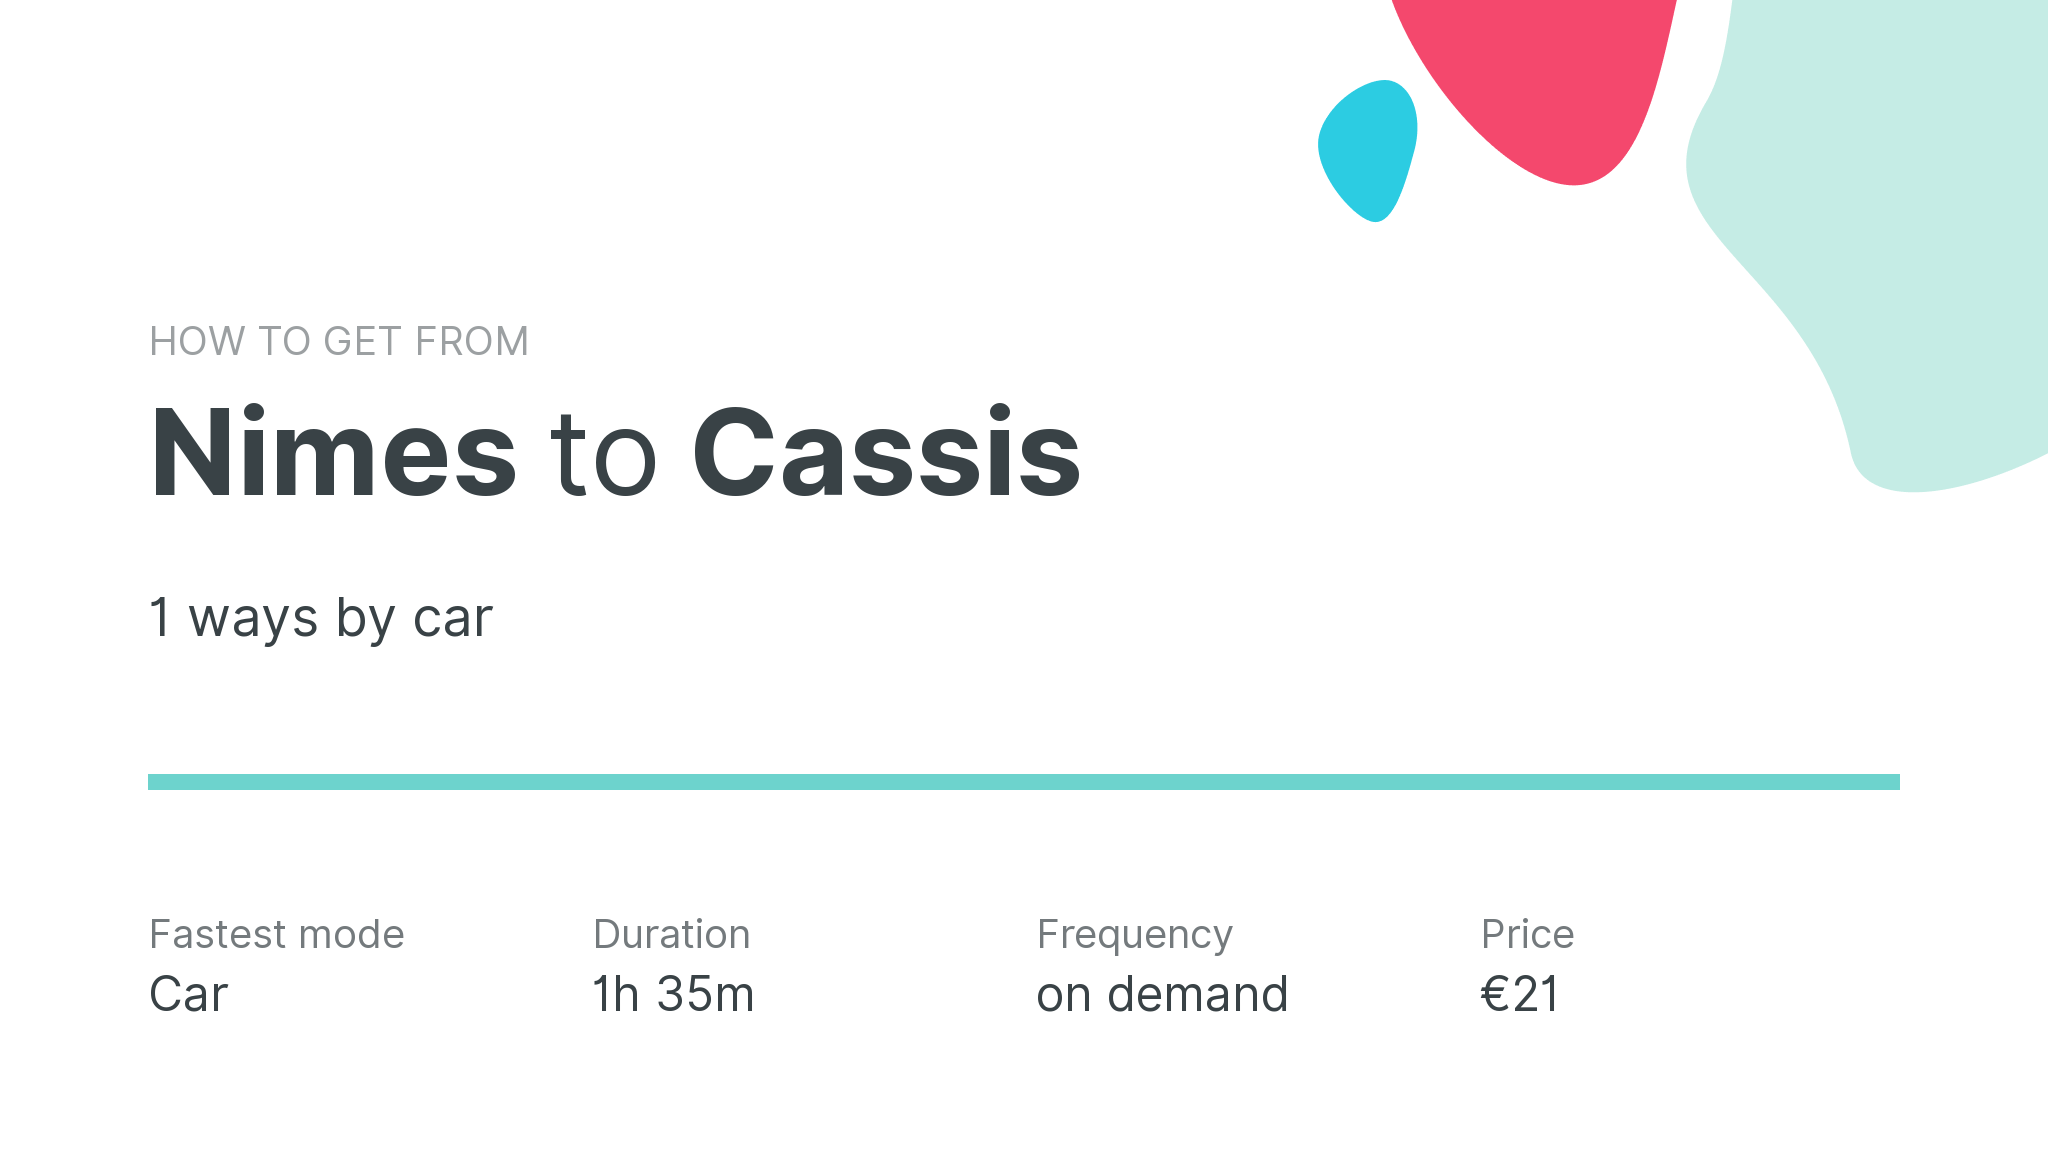 How do I get from Nimes to Cassis